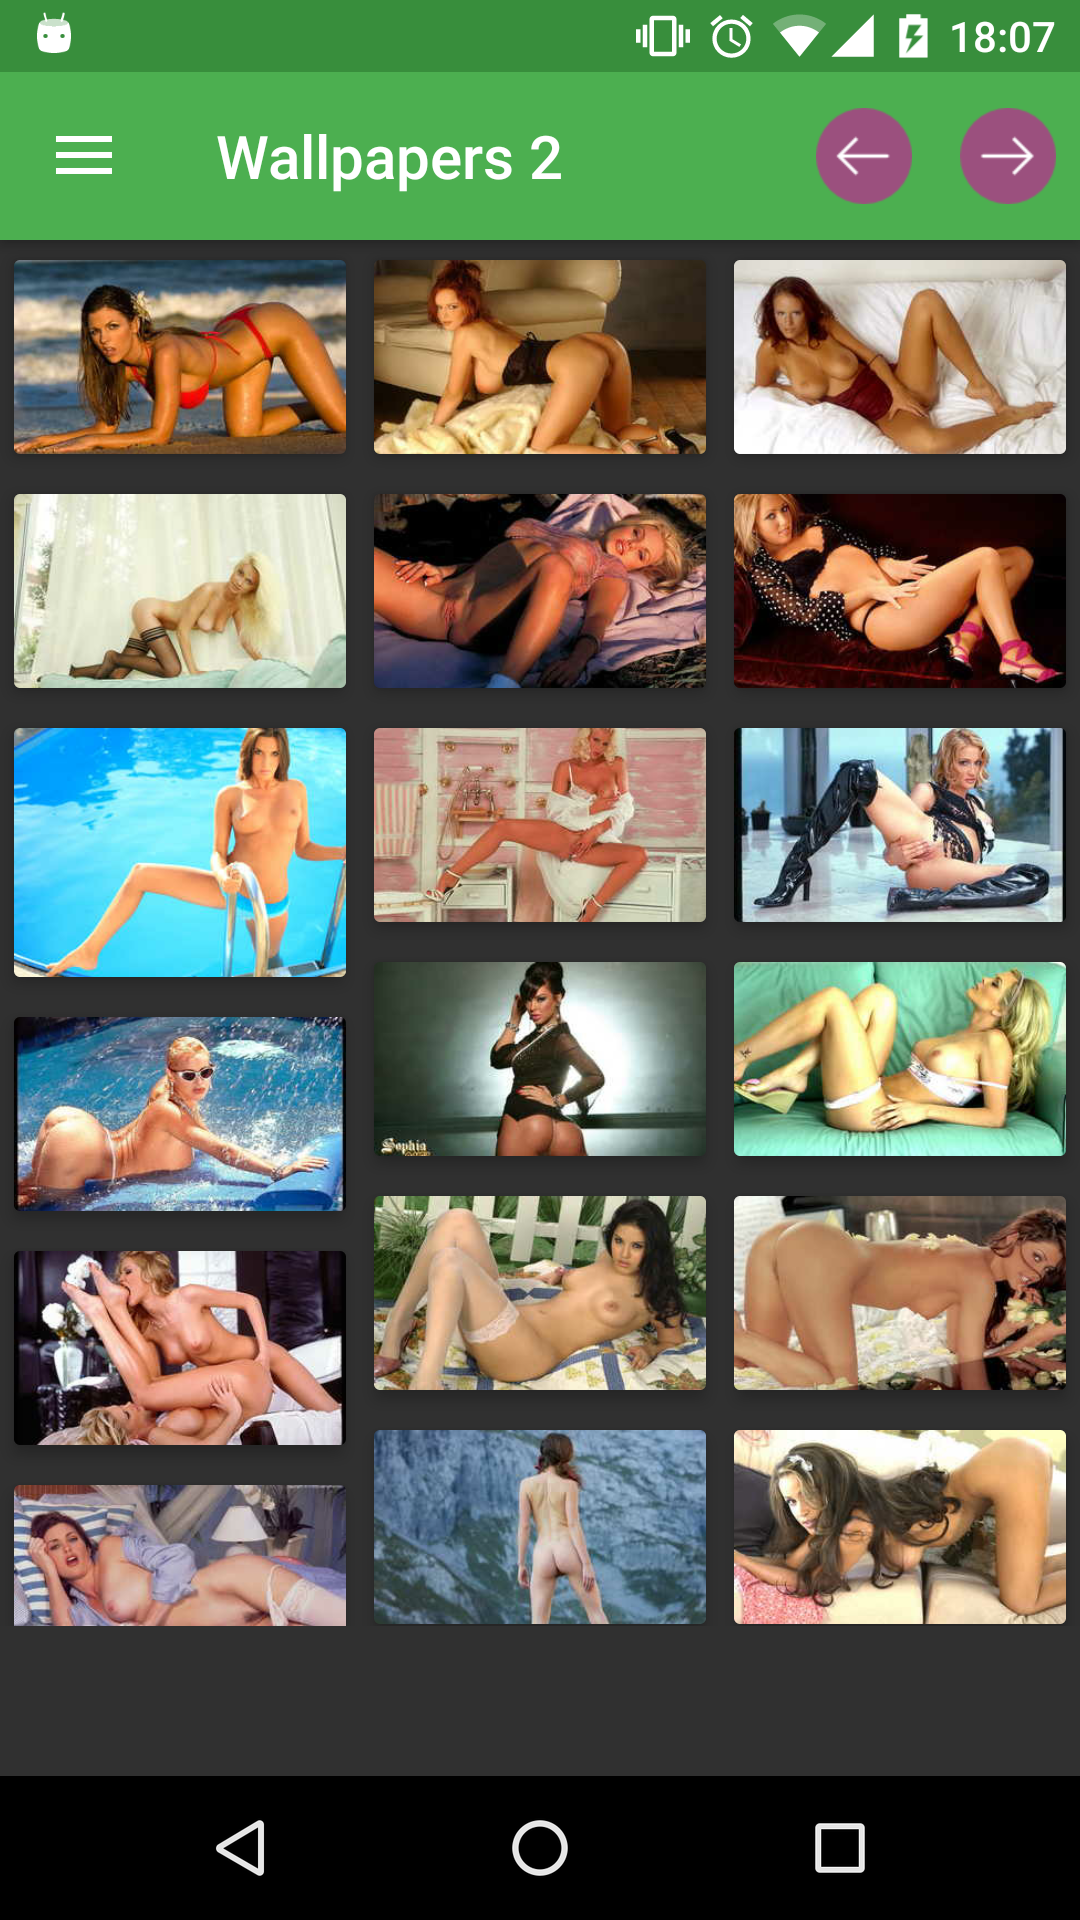 Rx Erotic Wallpapers sexy,hentai,artwork,android,pornostar,puzzles,backgrounds,panties,for,picx,apks,porn,henti,apps,erotic,pictures,wallpaper,hentay,apk,download,futanari,image,femboy,wallpapers,and